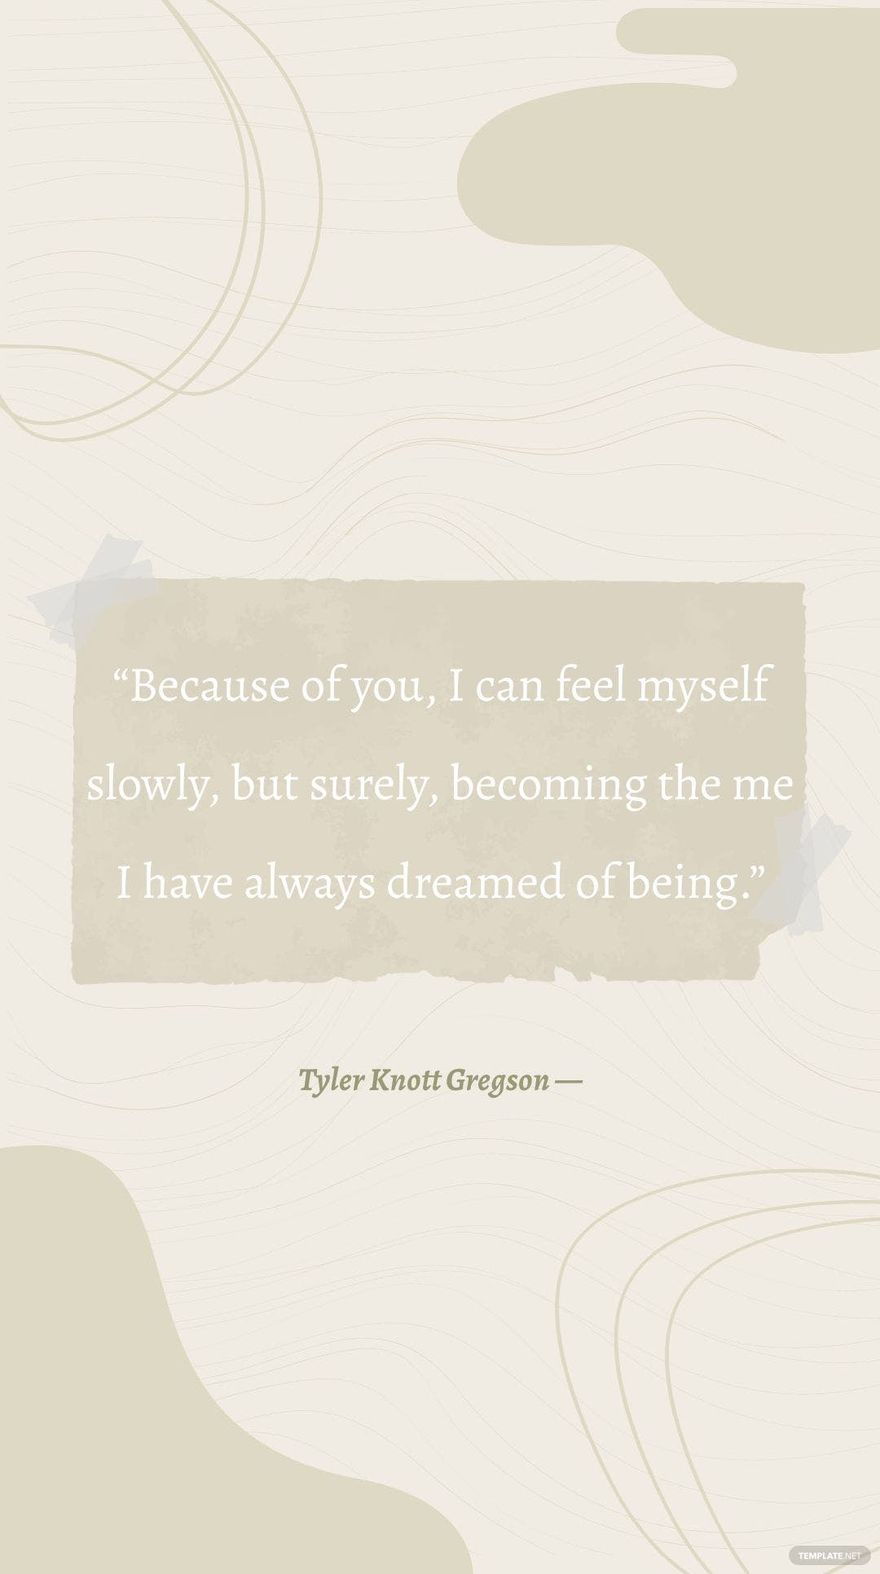 Tyler Knott Gregson — “Because of you, I can feel myself slowly, but surely, becoming the me I have always dreamed of being.”